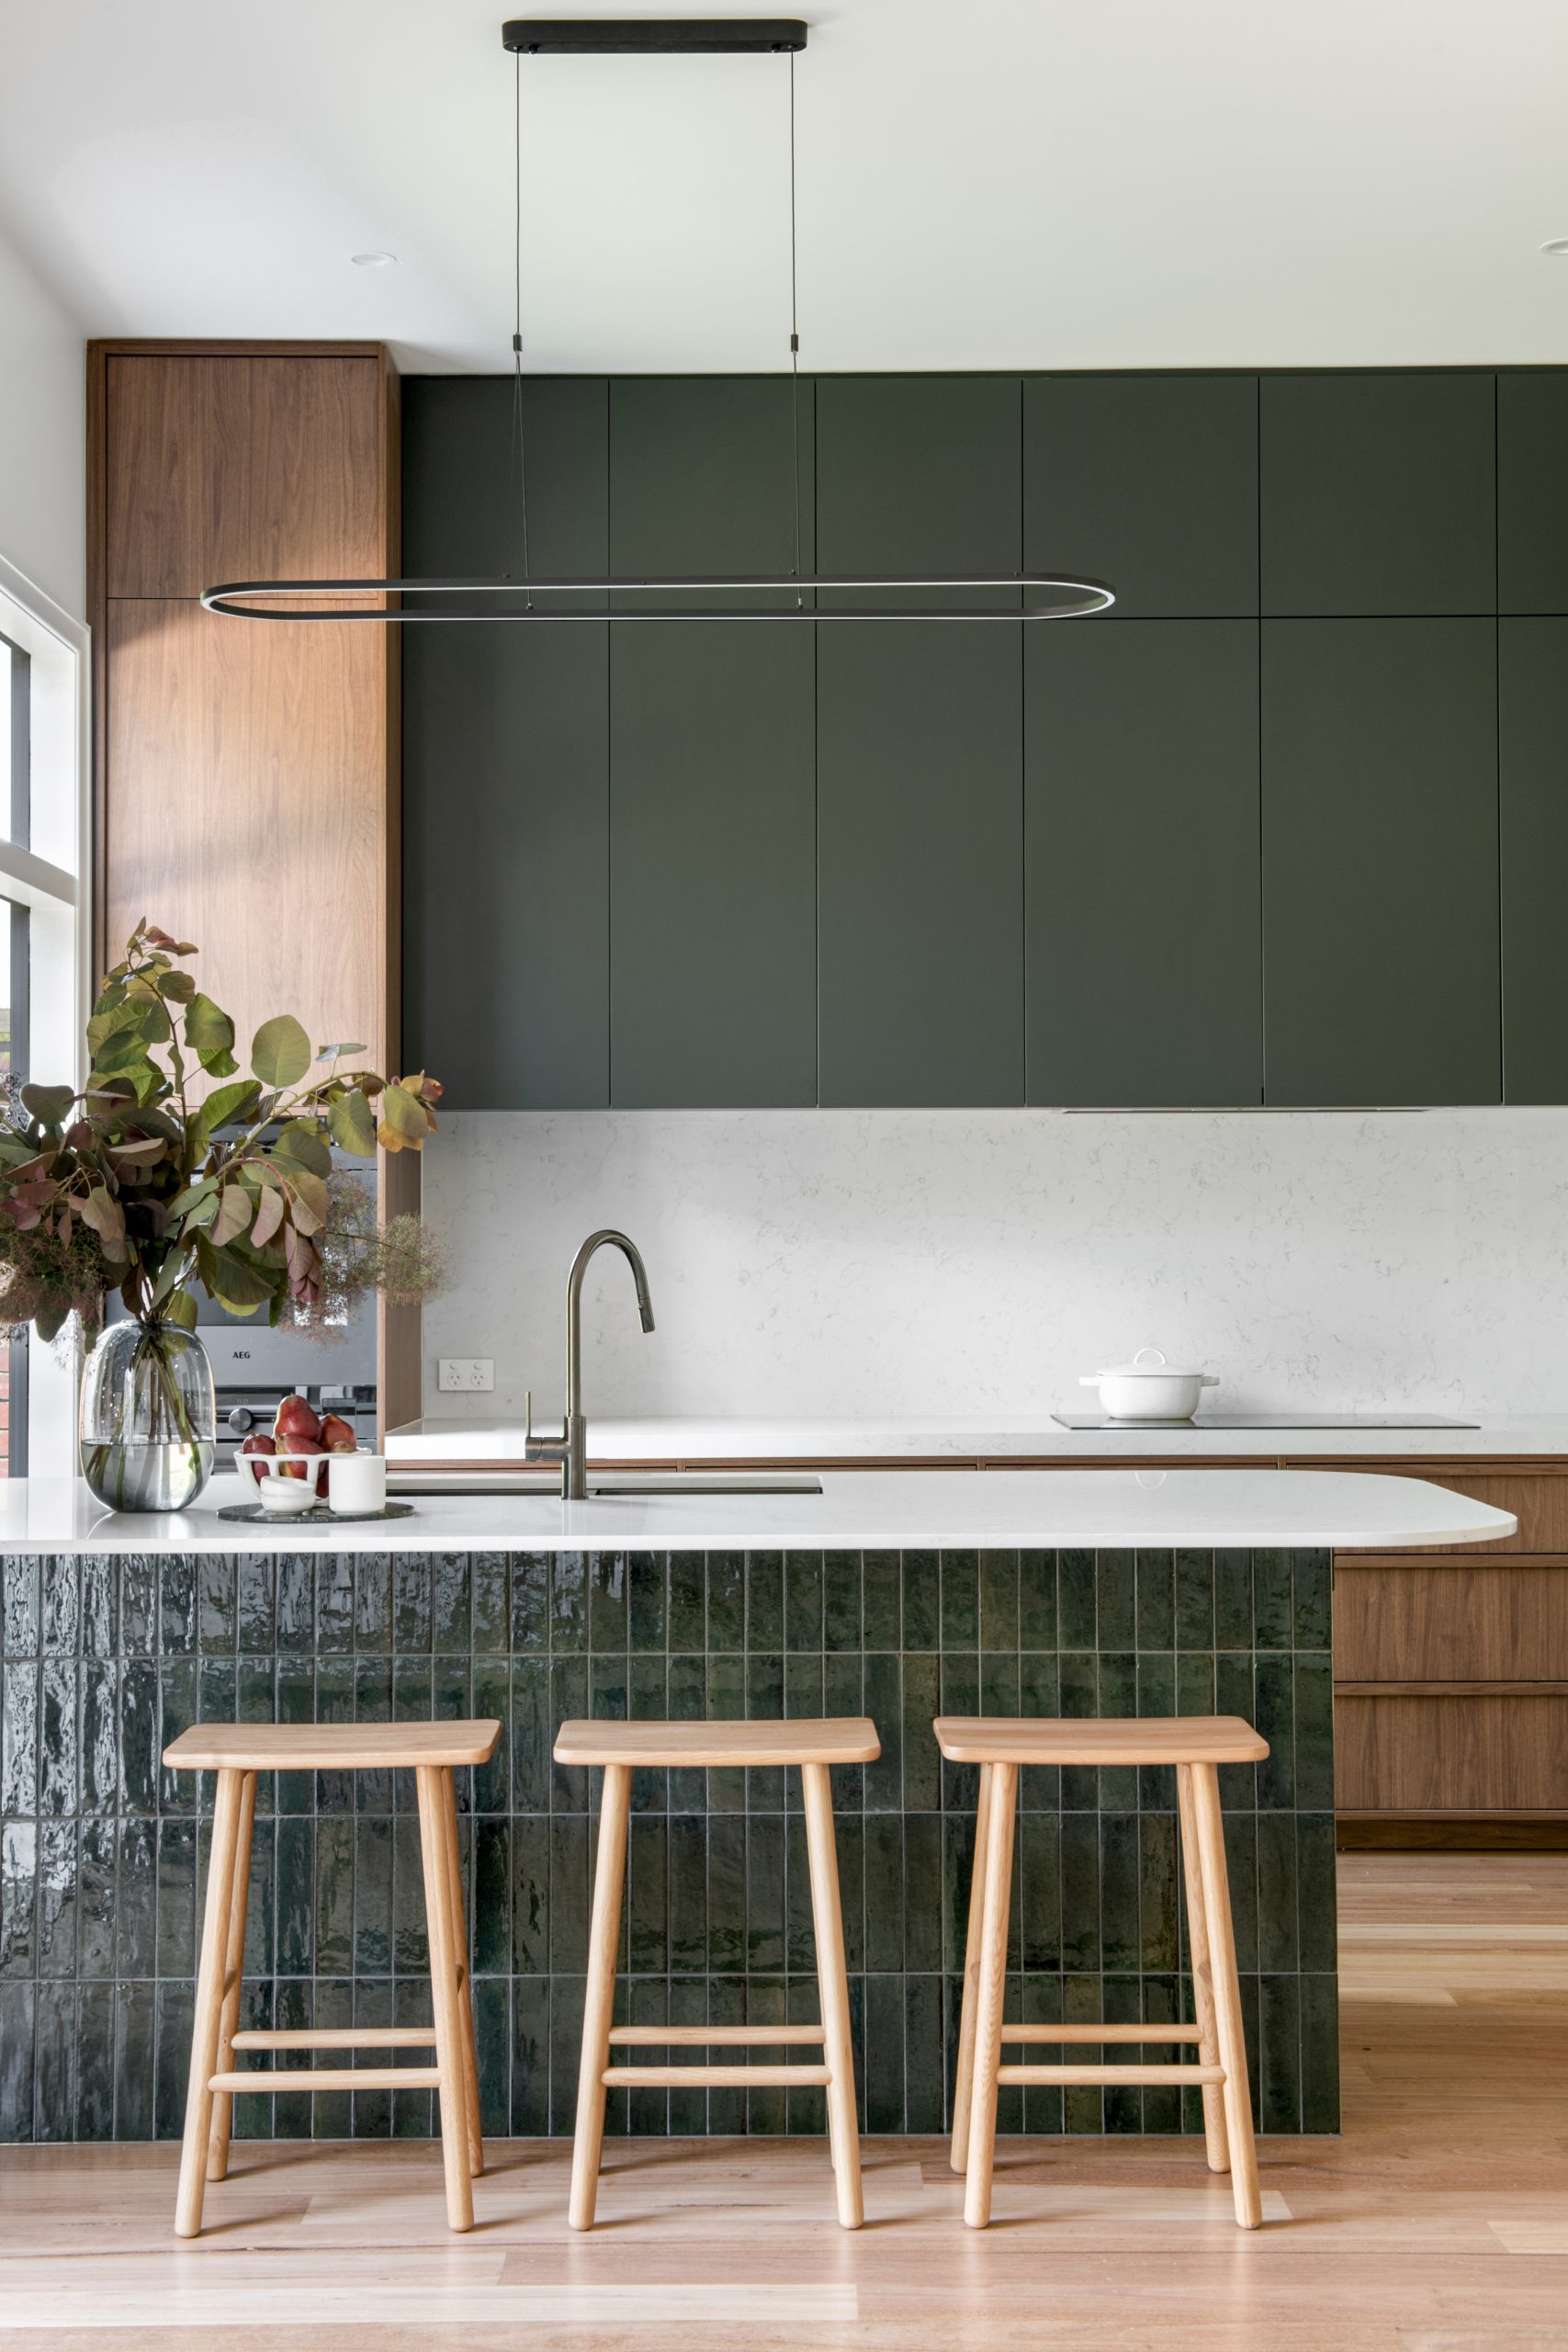 A custom designed kitchen featuring walnut joinery and handmade gloss green tiles. Designed and built by MJ Harris Group.